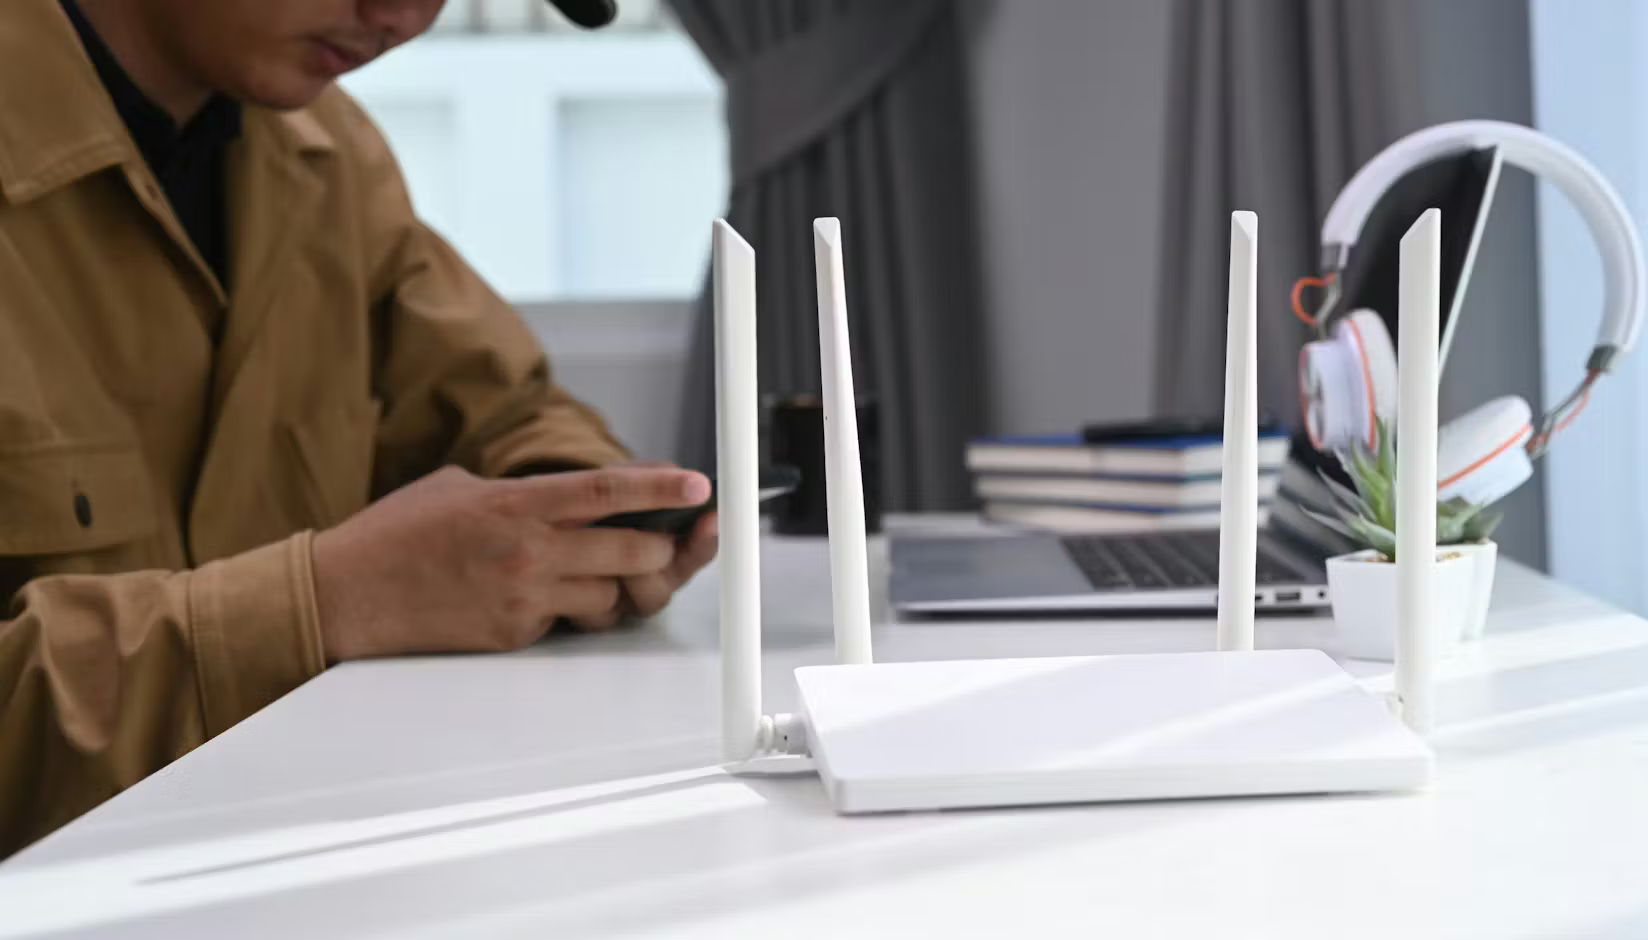 How to Automate WiFi at a Coworking Space in 5 Simple Steps